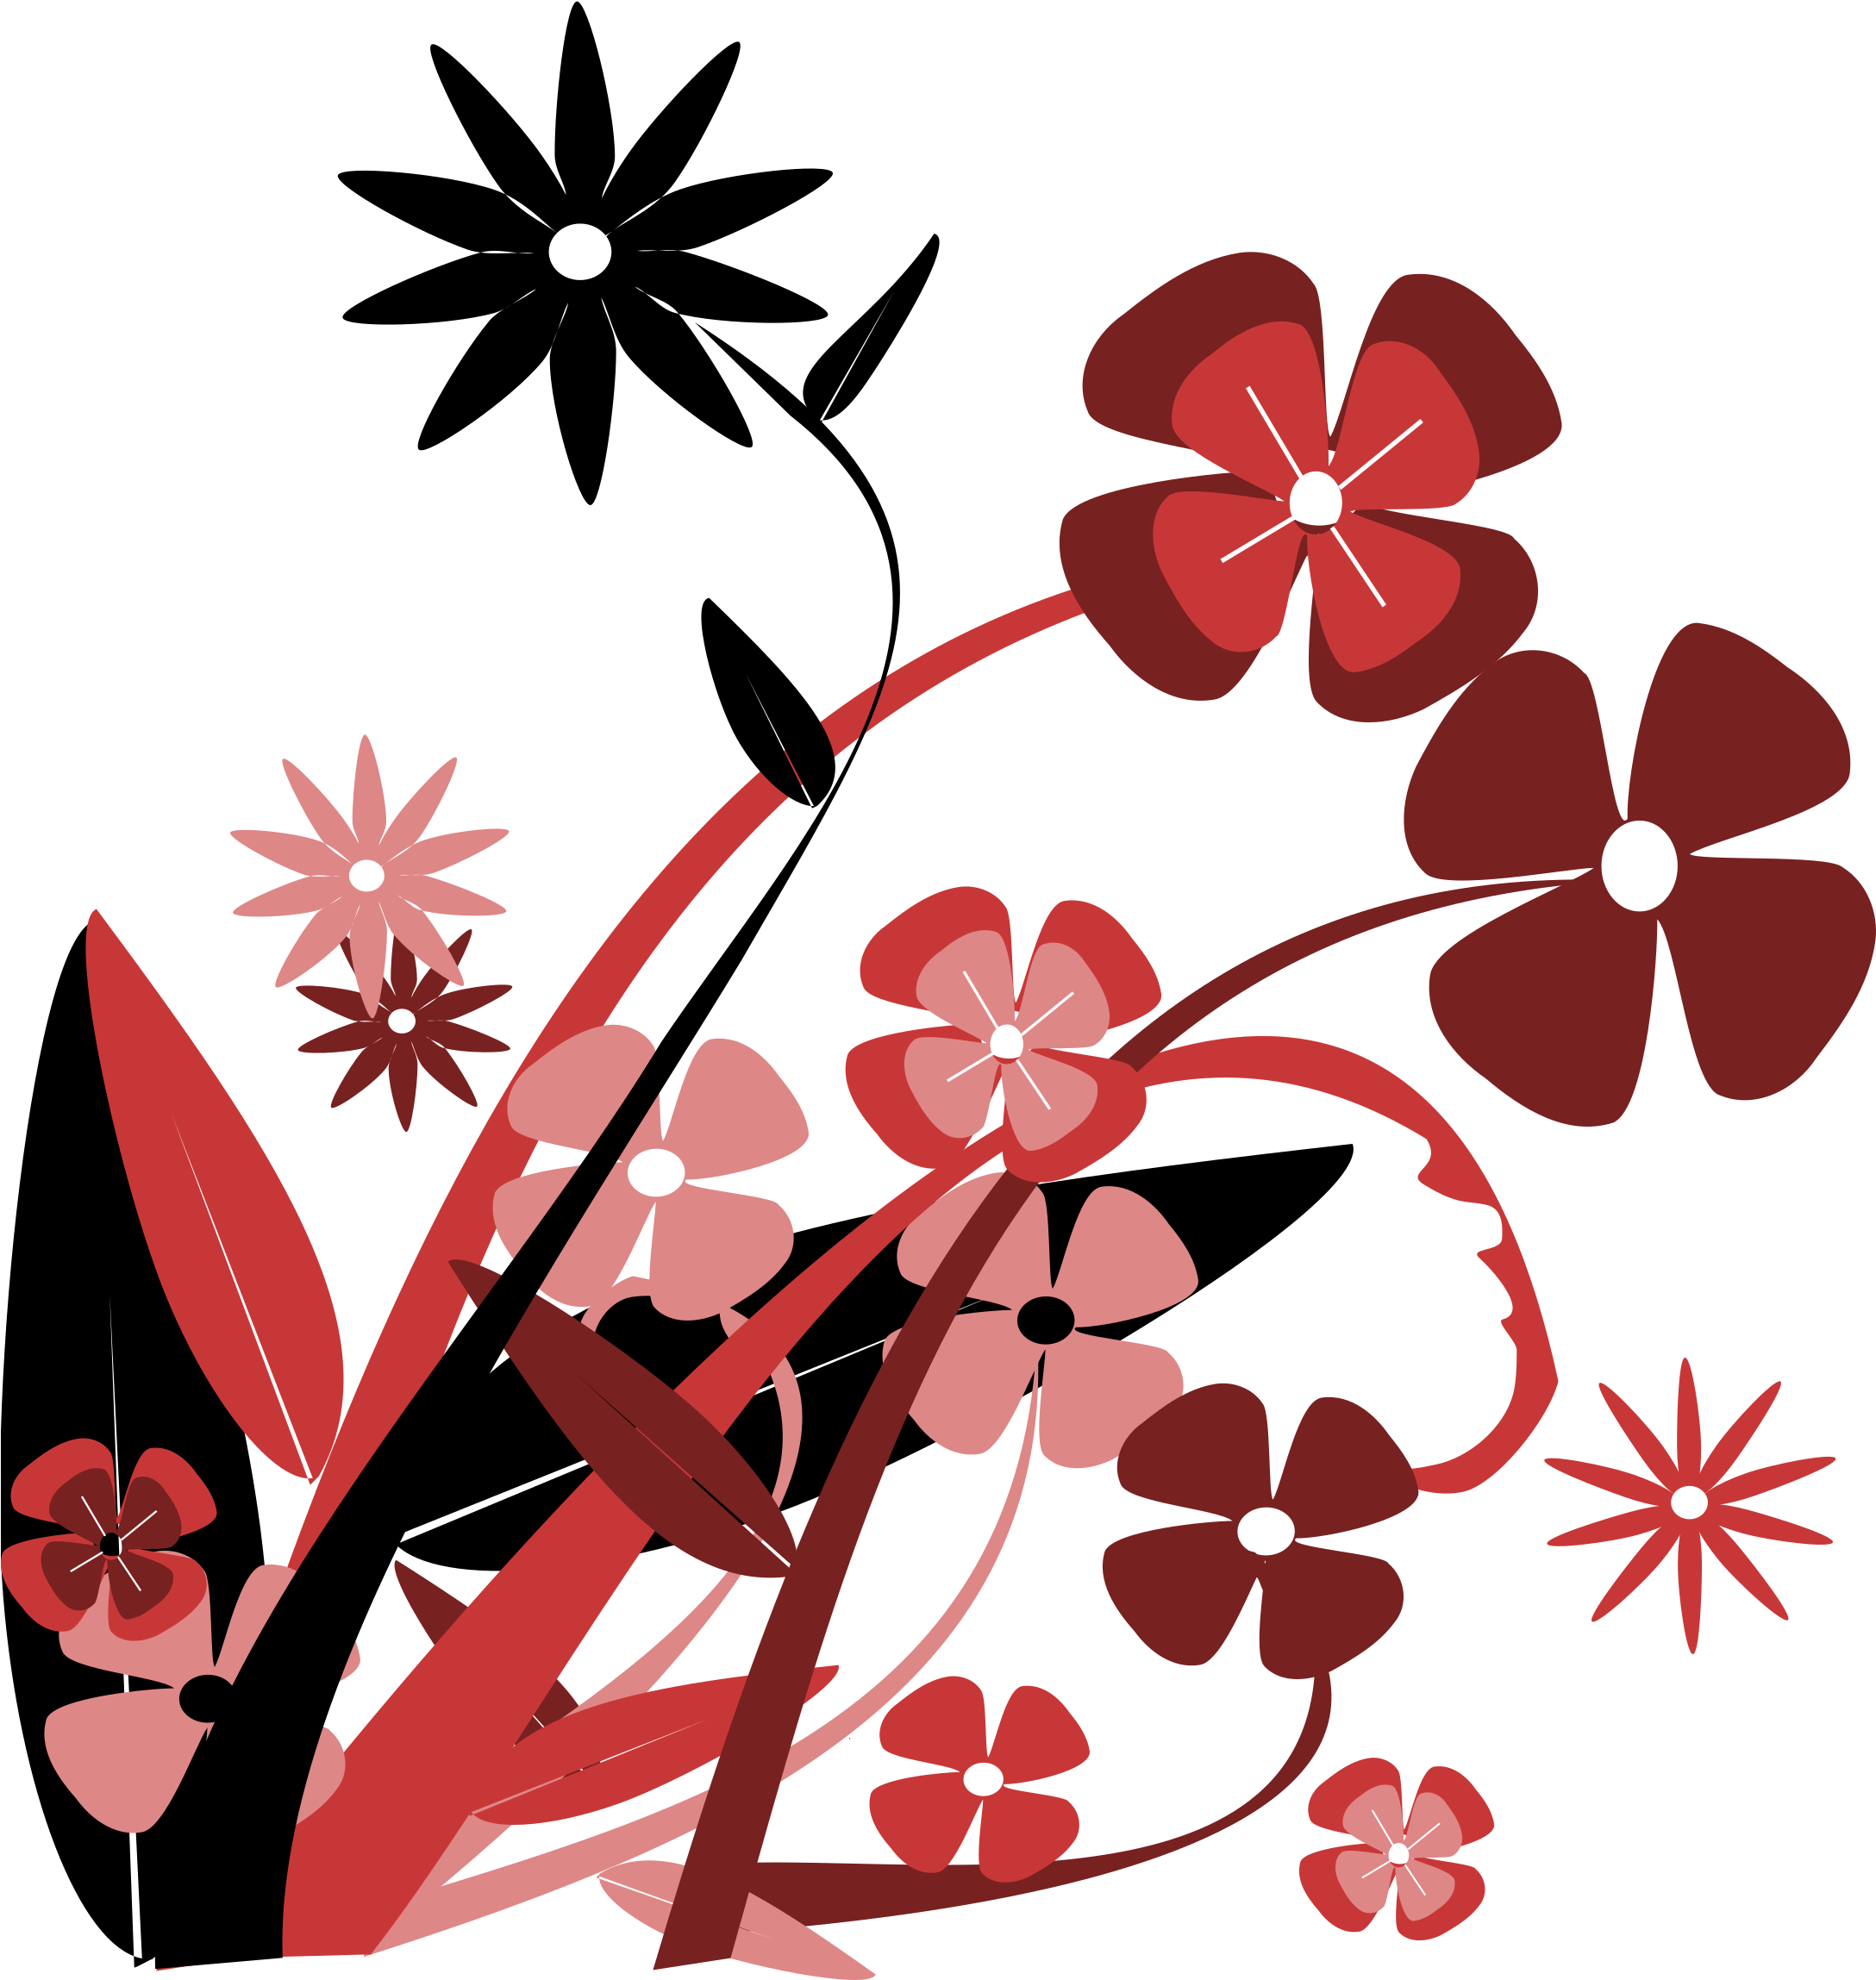 Big Image - Red Flower Vector Png (2175x2400)